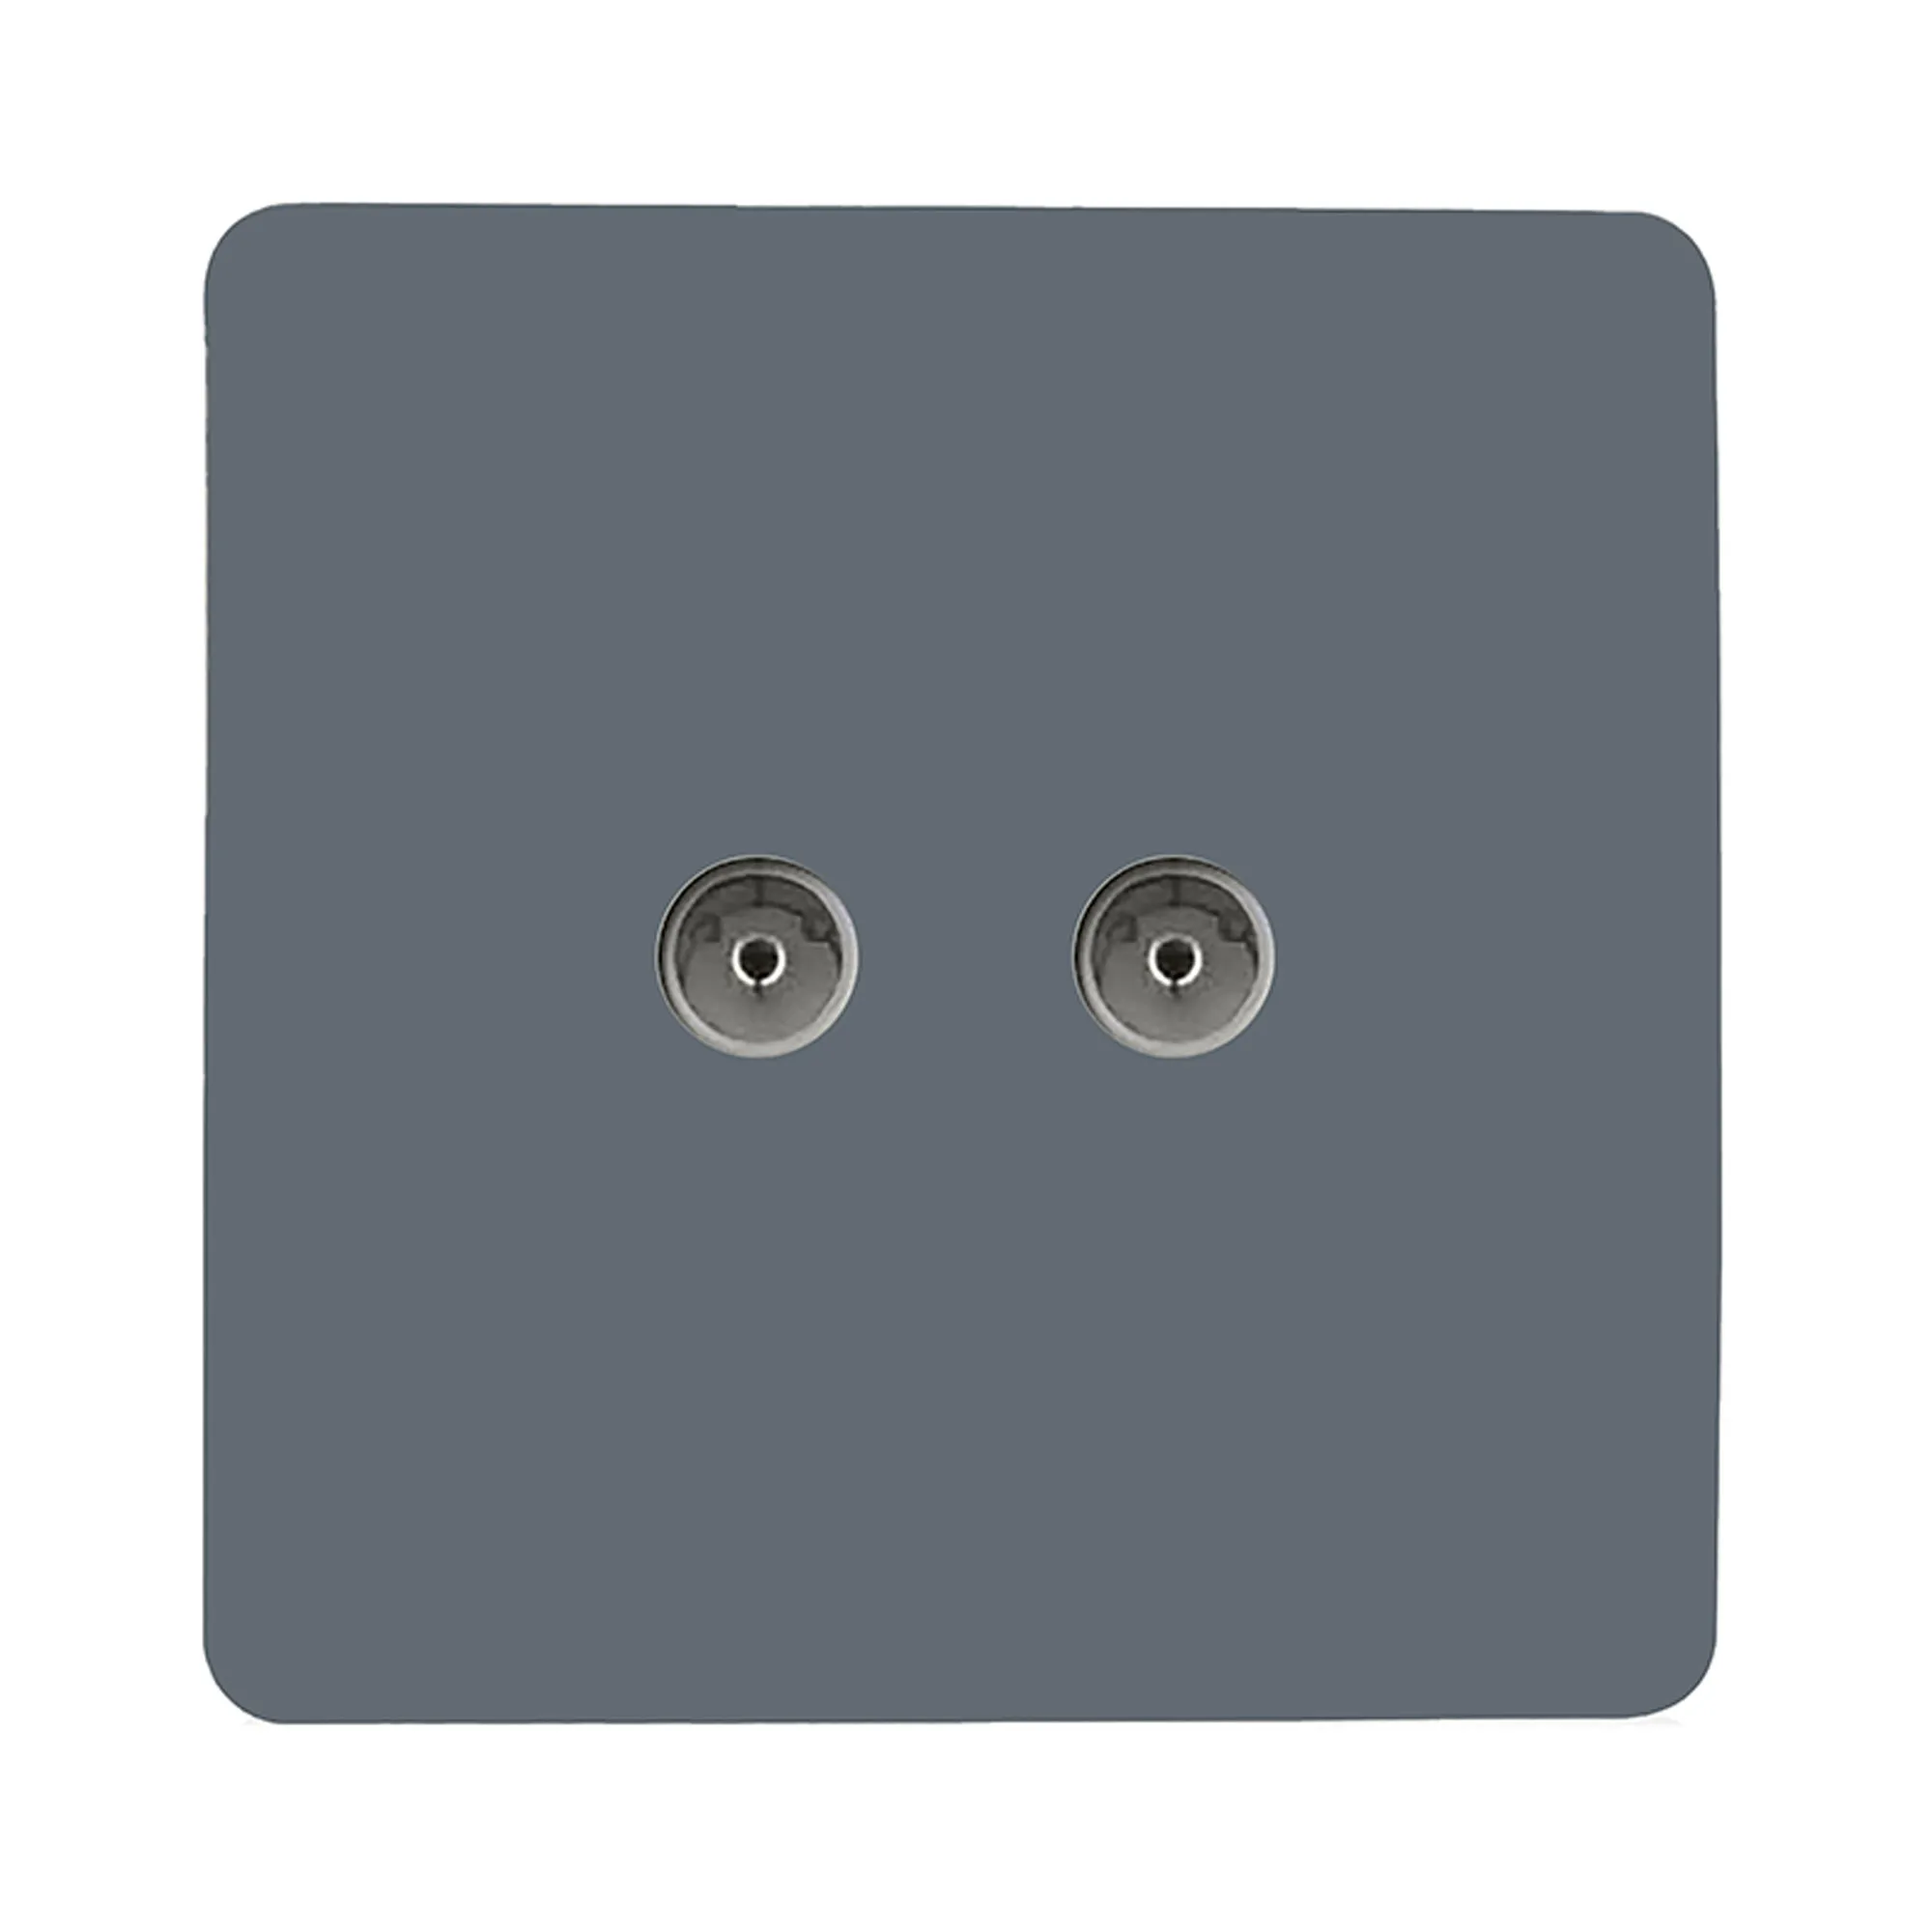 Twin TV Co-Axial Outlet Warm Grey